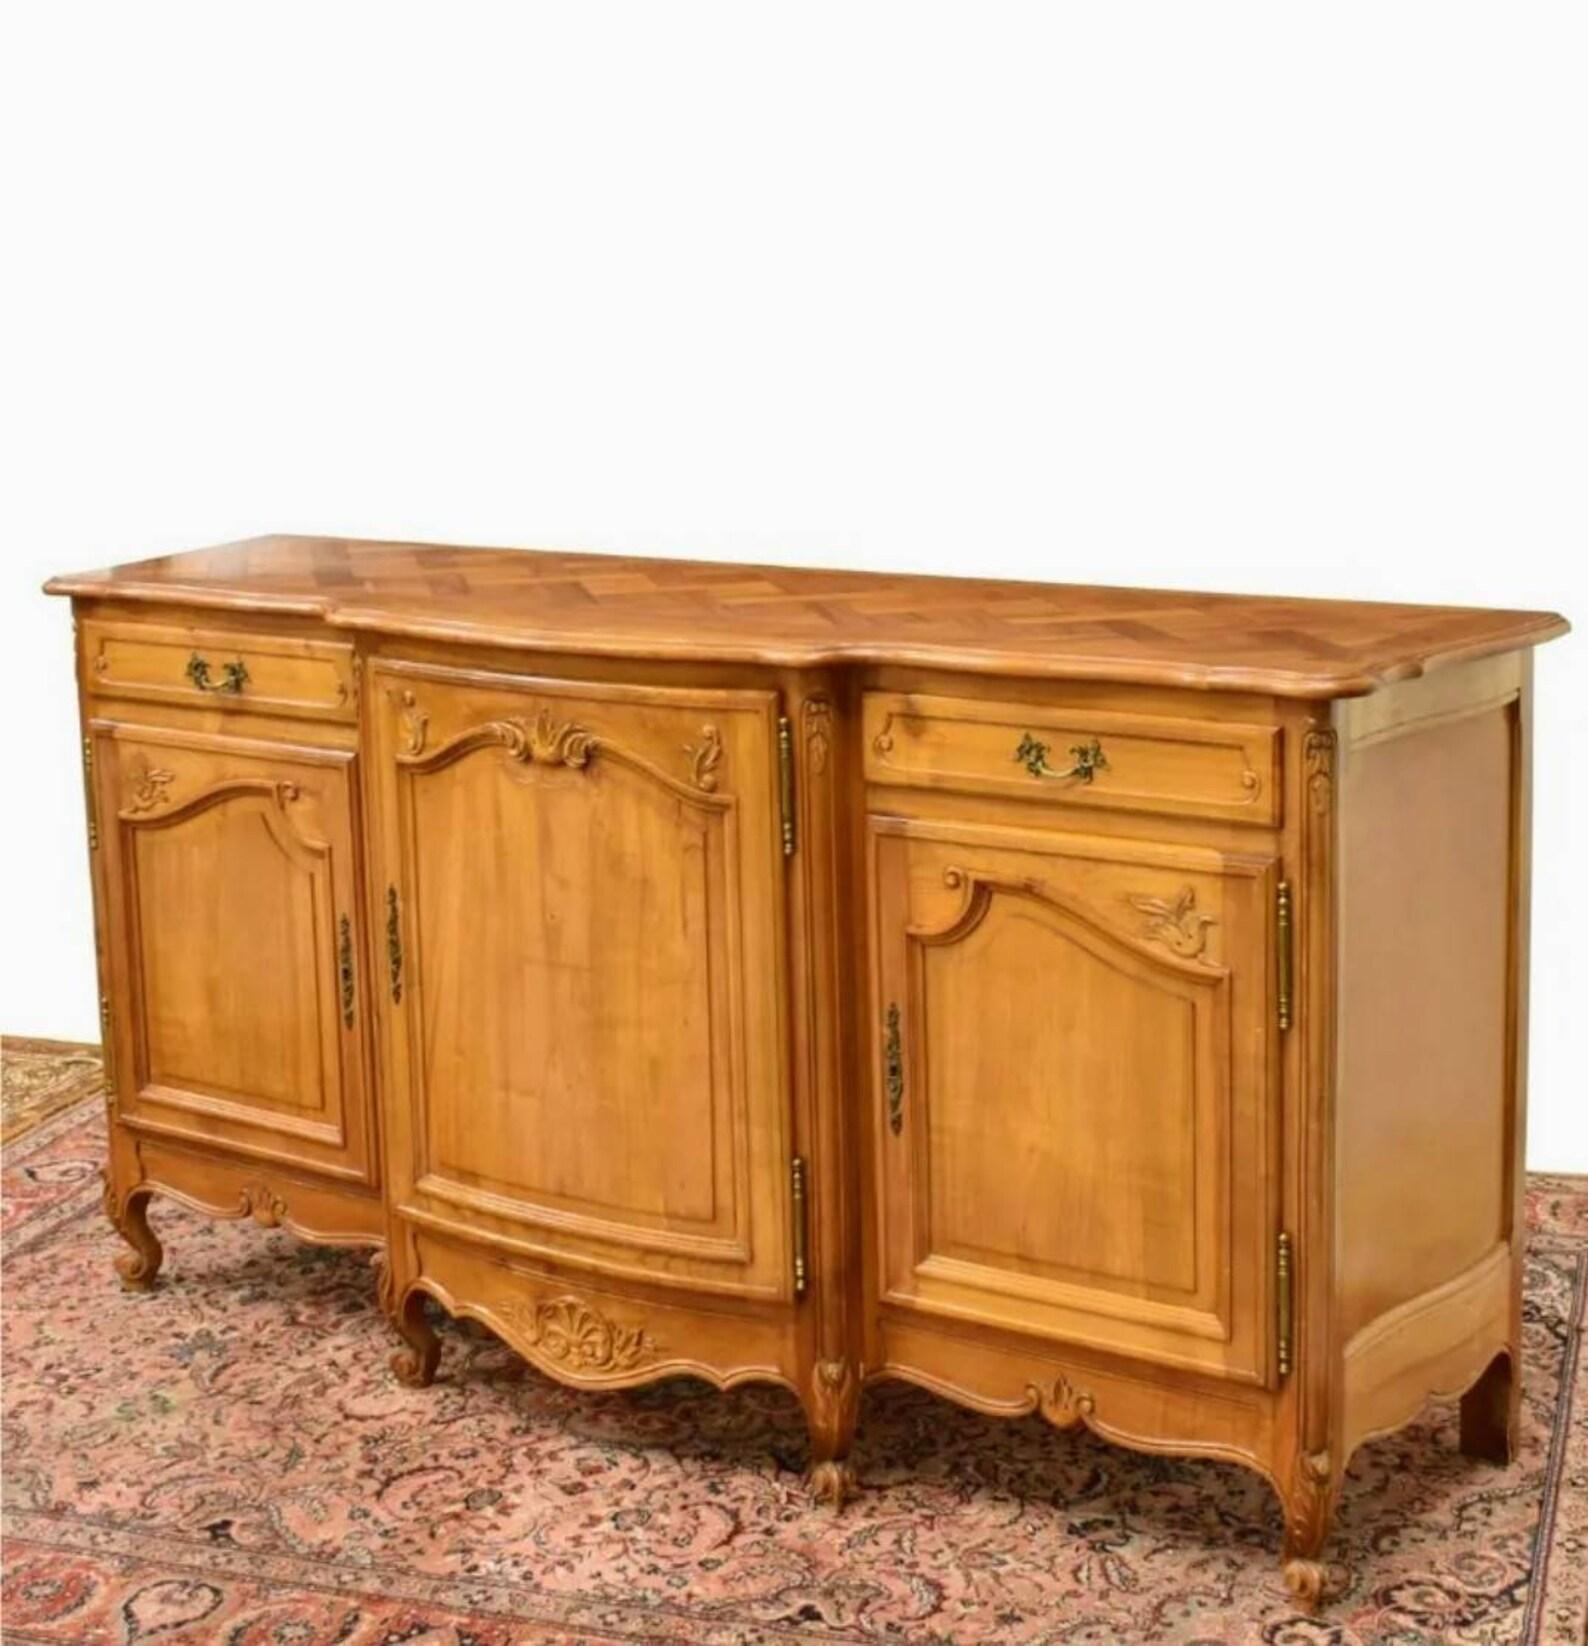 An exceptional vintage country French Louis XV style fruitwood breakfront sideboard.

Hand-crafted in France during the first half of the 20th century, featuring an elegant and sophisticated parquetry-work top with elaborate serpentine shaped